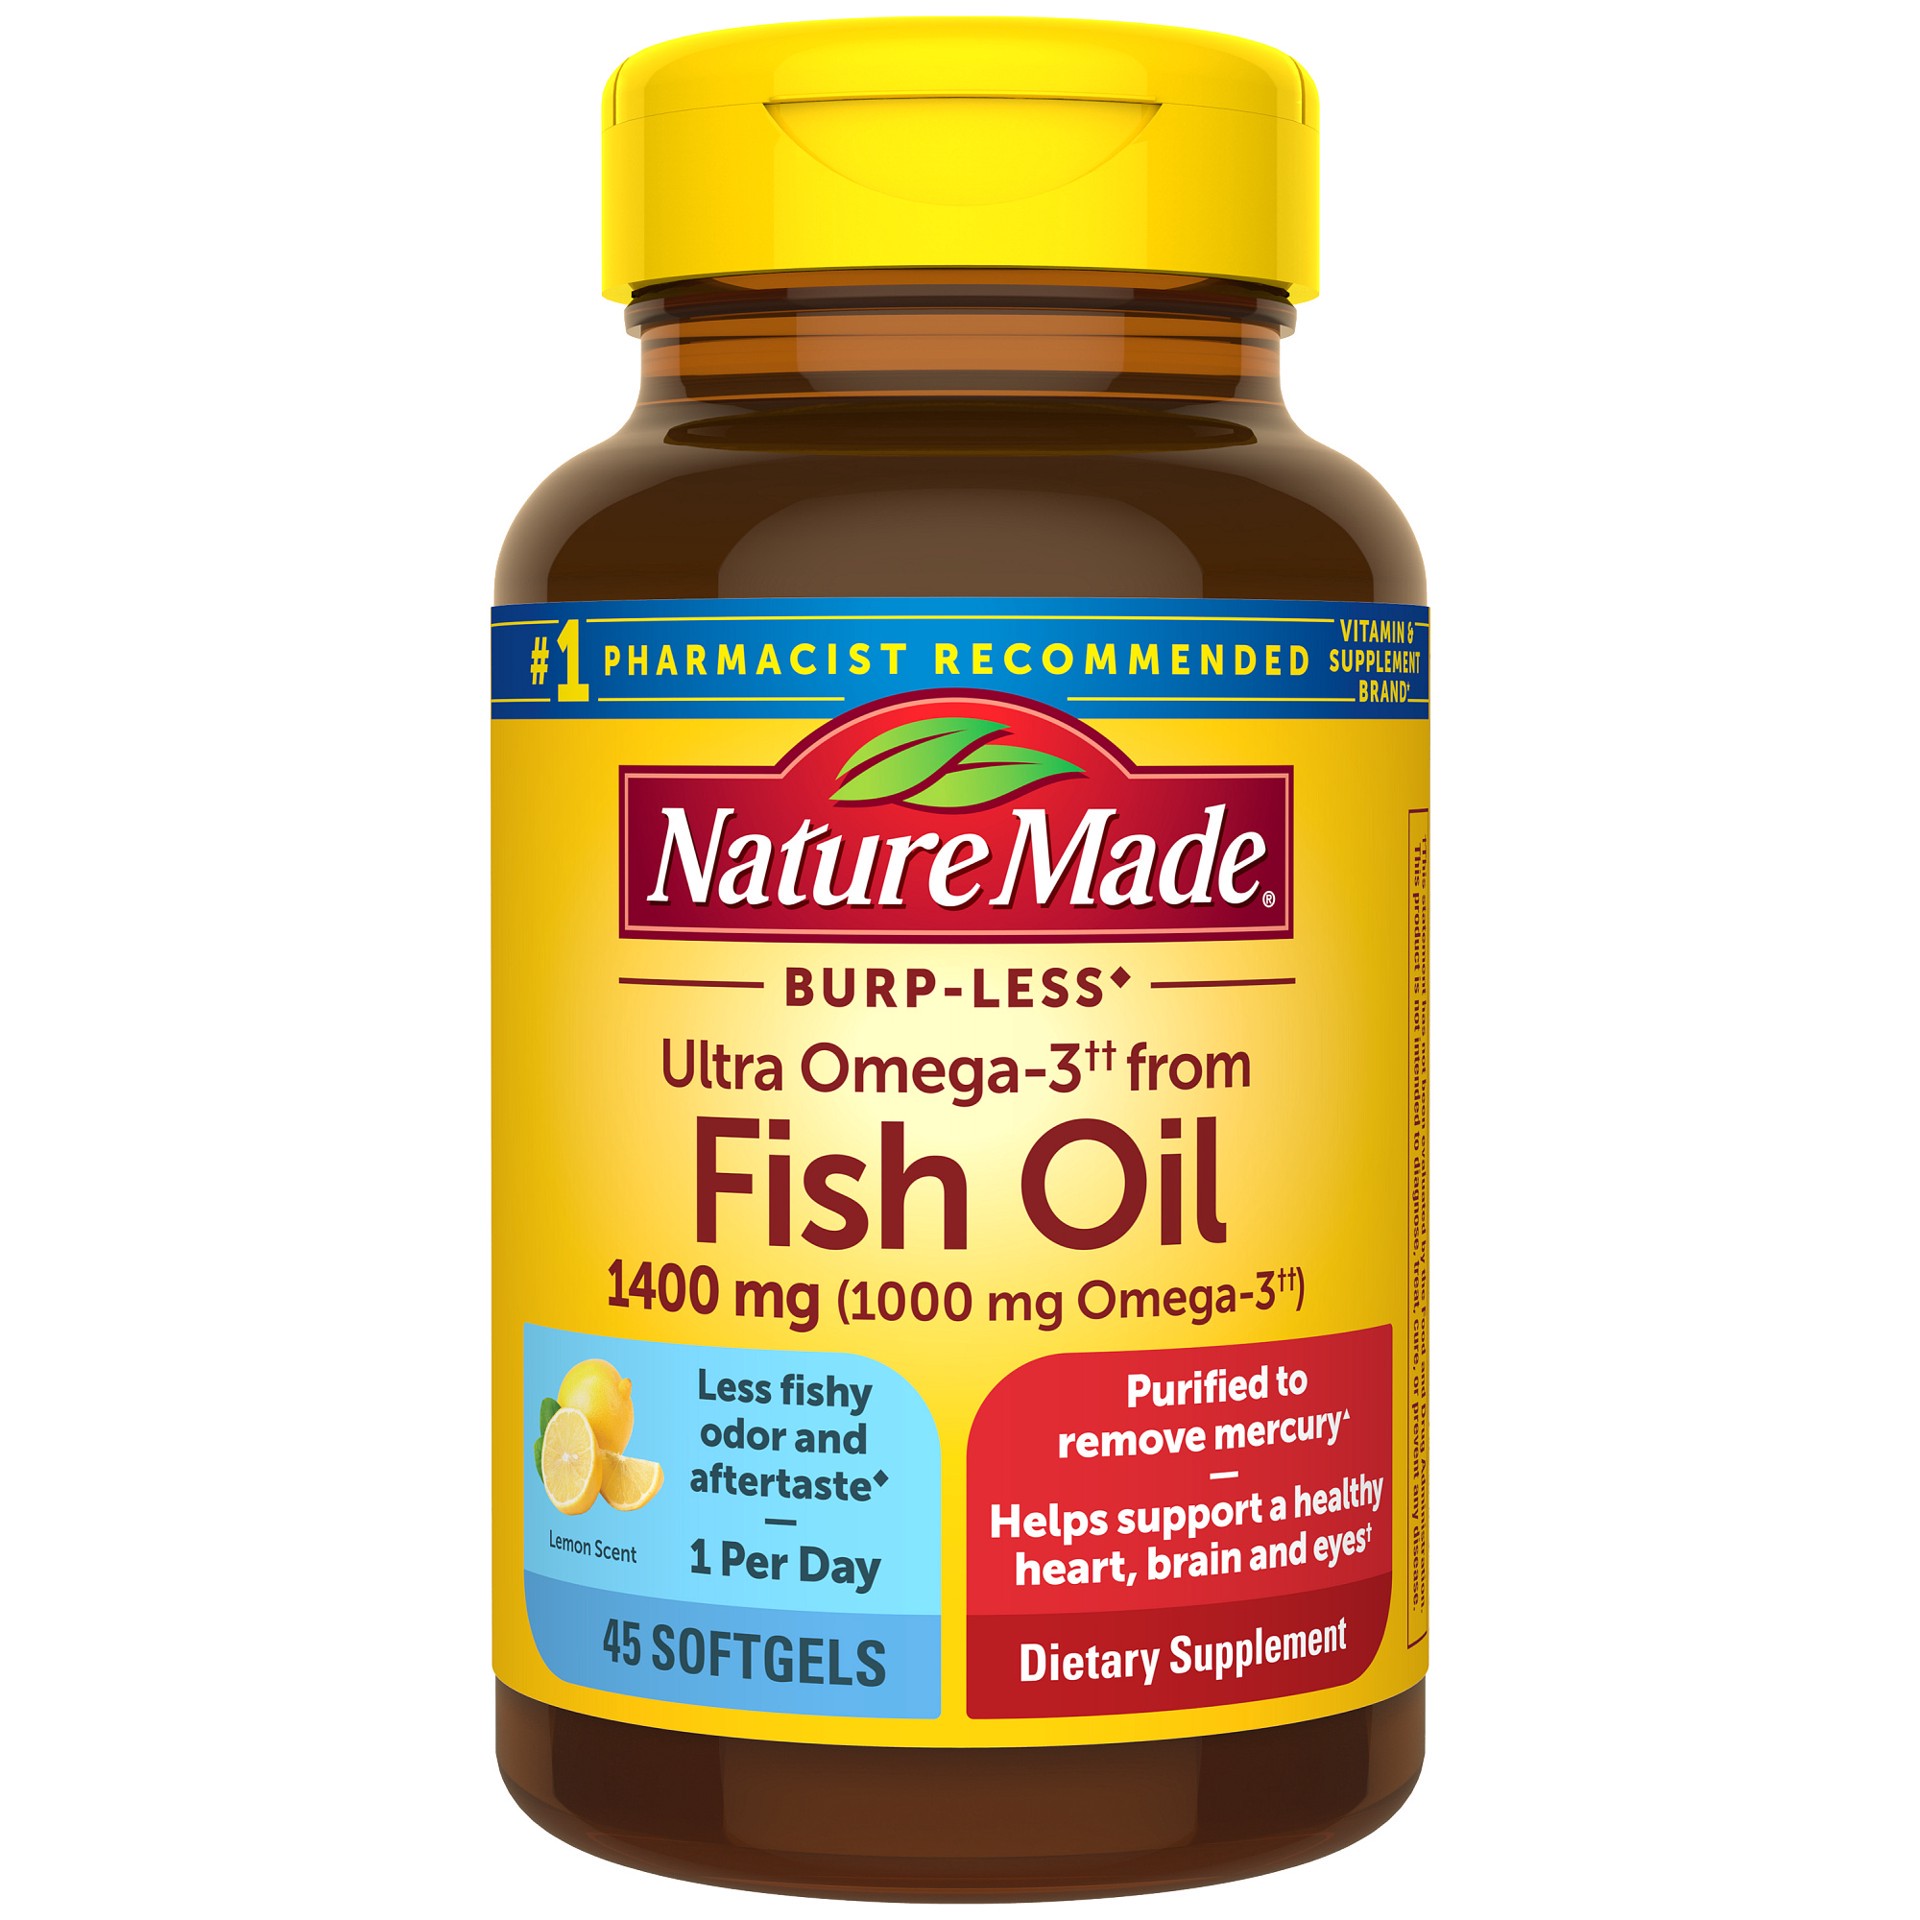 slide 1 of 4, Nature Made Burp Less Ultra Omega 3 Fish Oil 1400 mg, Fish Oil Supplements, Omega 3 Supplement for Healthy Heart, Brain and Eyes Support, One Per Day, 45 Softgels, 45 ct